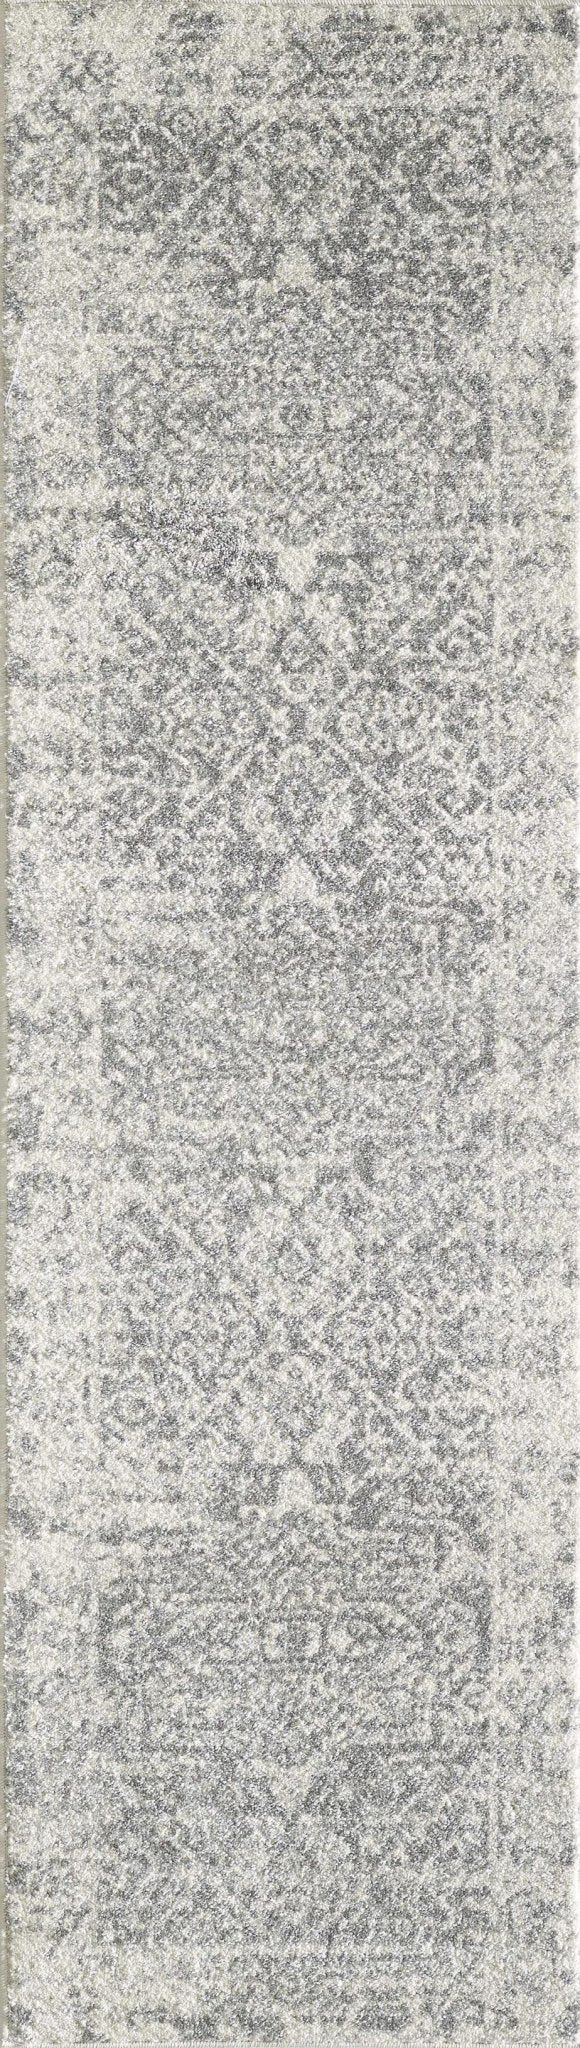 8'x10' Grey Machine Woven Distressed Floral Medallion Indoor Area Rug